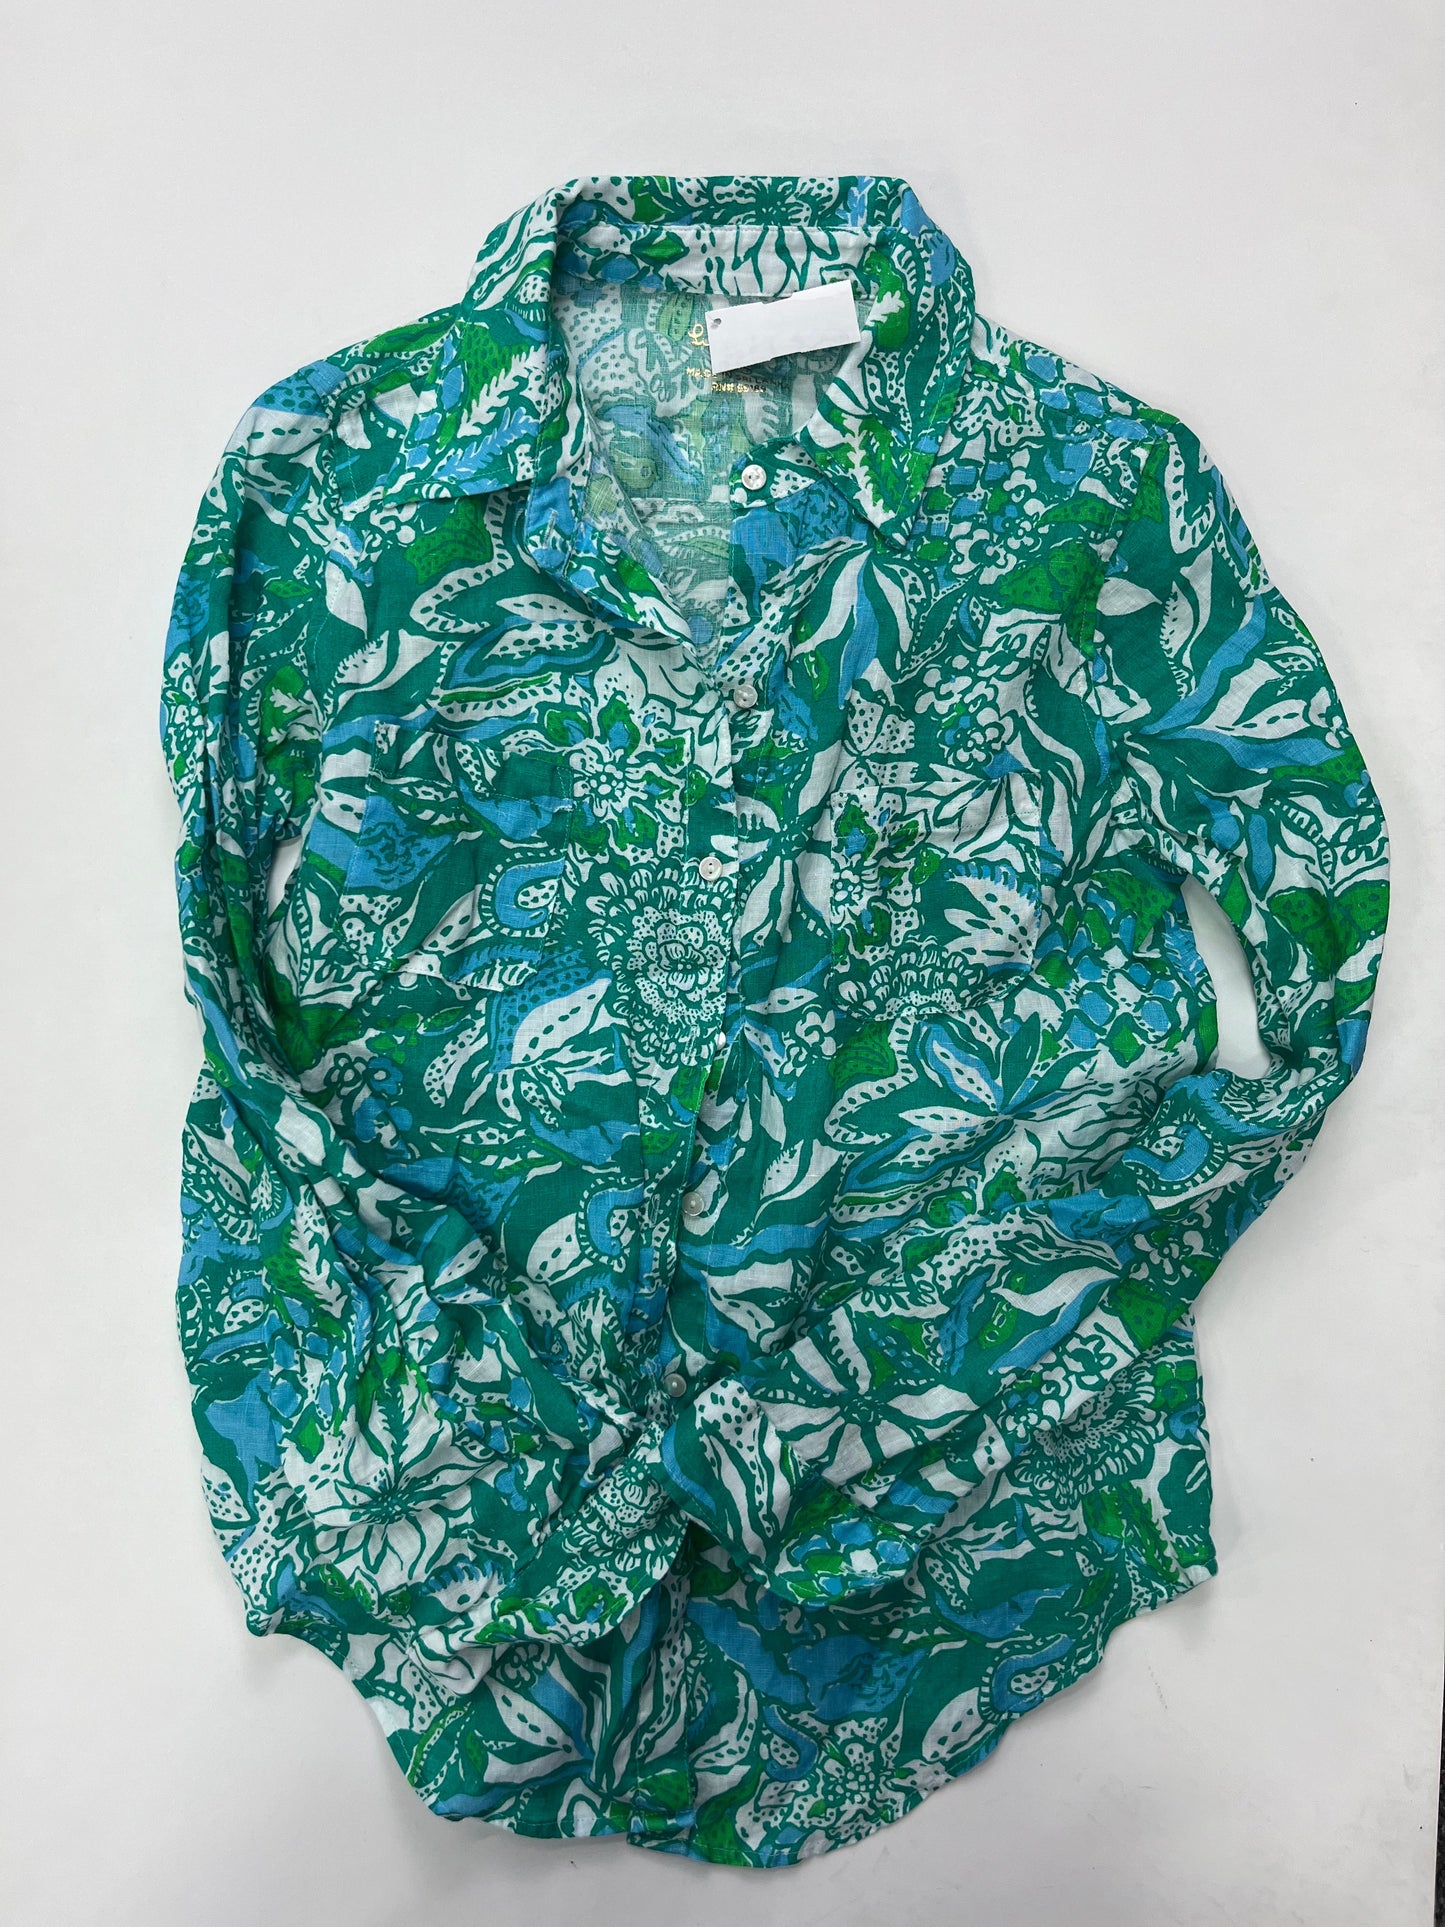 Linen Blouse Long Sleeve Lilly Pulitzer, Size Xs